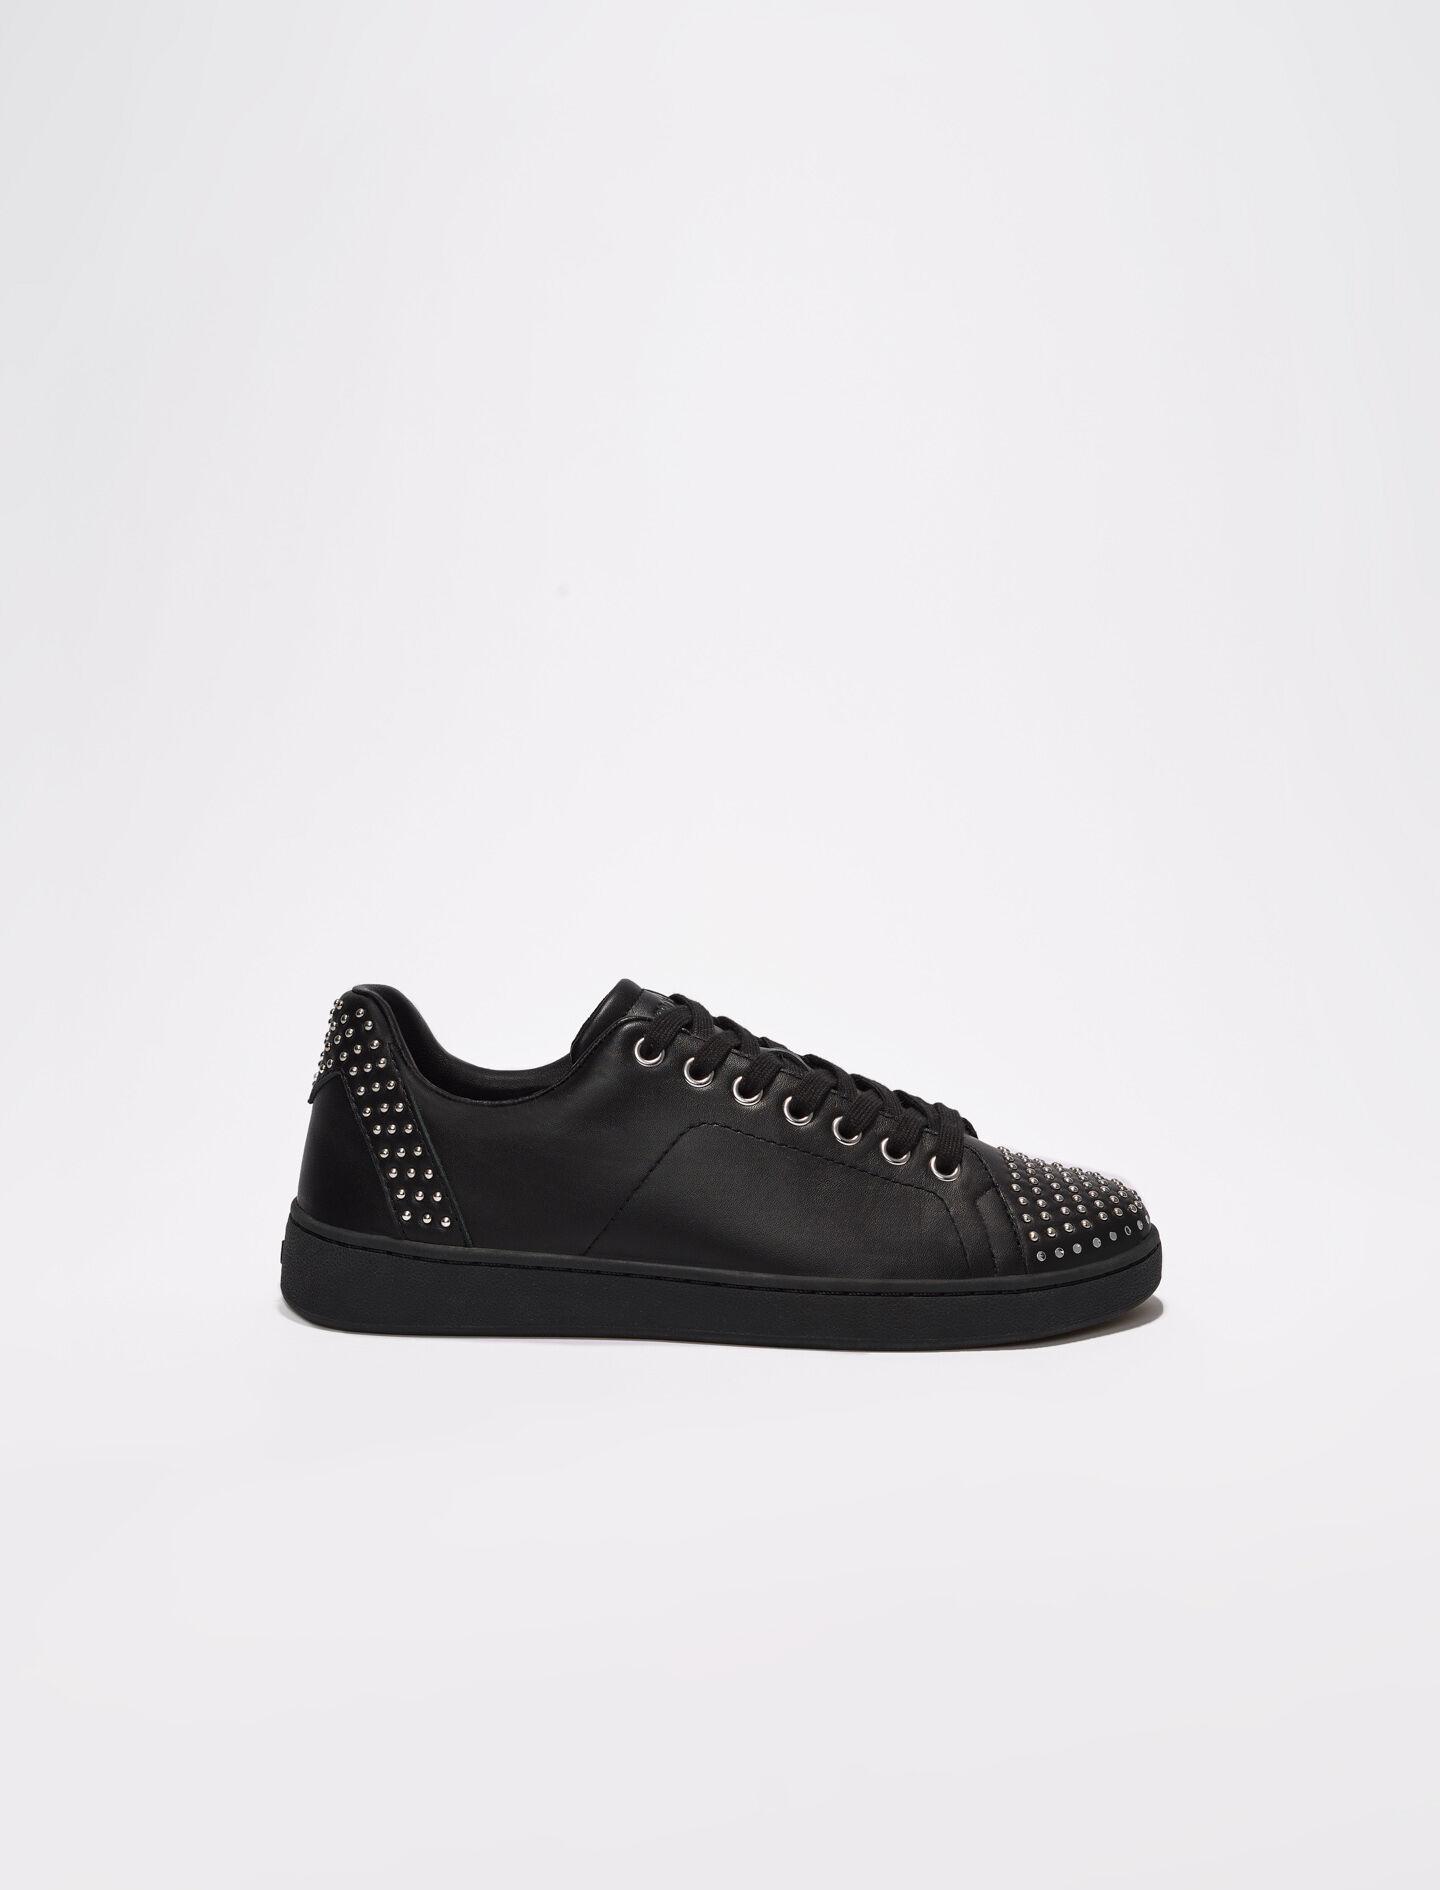 Maje Black Leather Trainers With Studs | Lyst